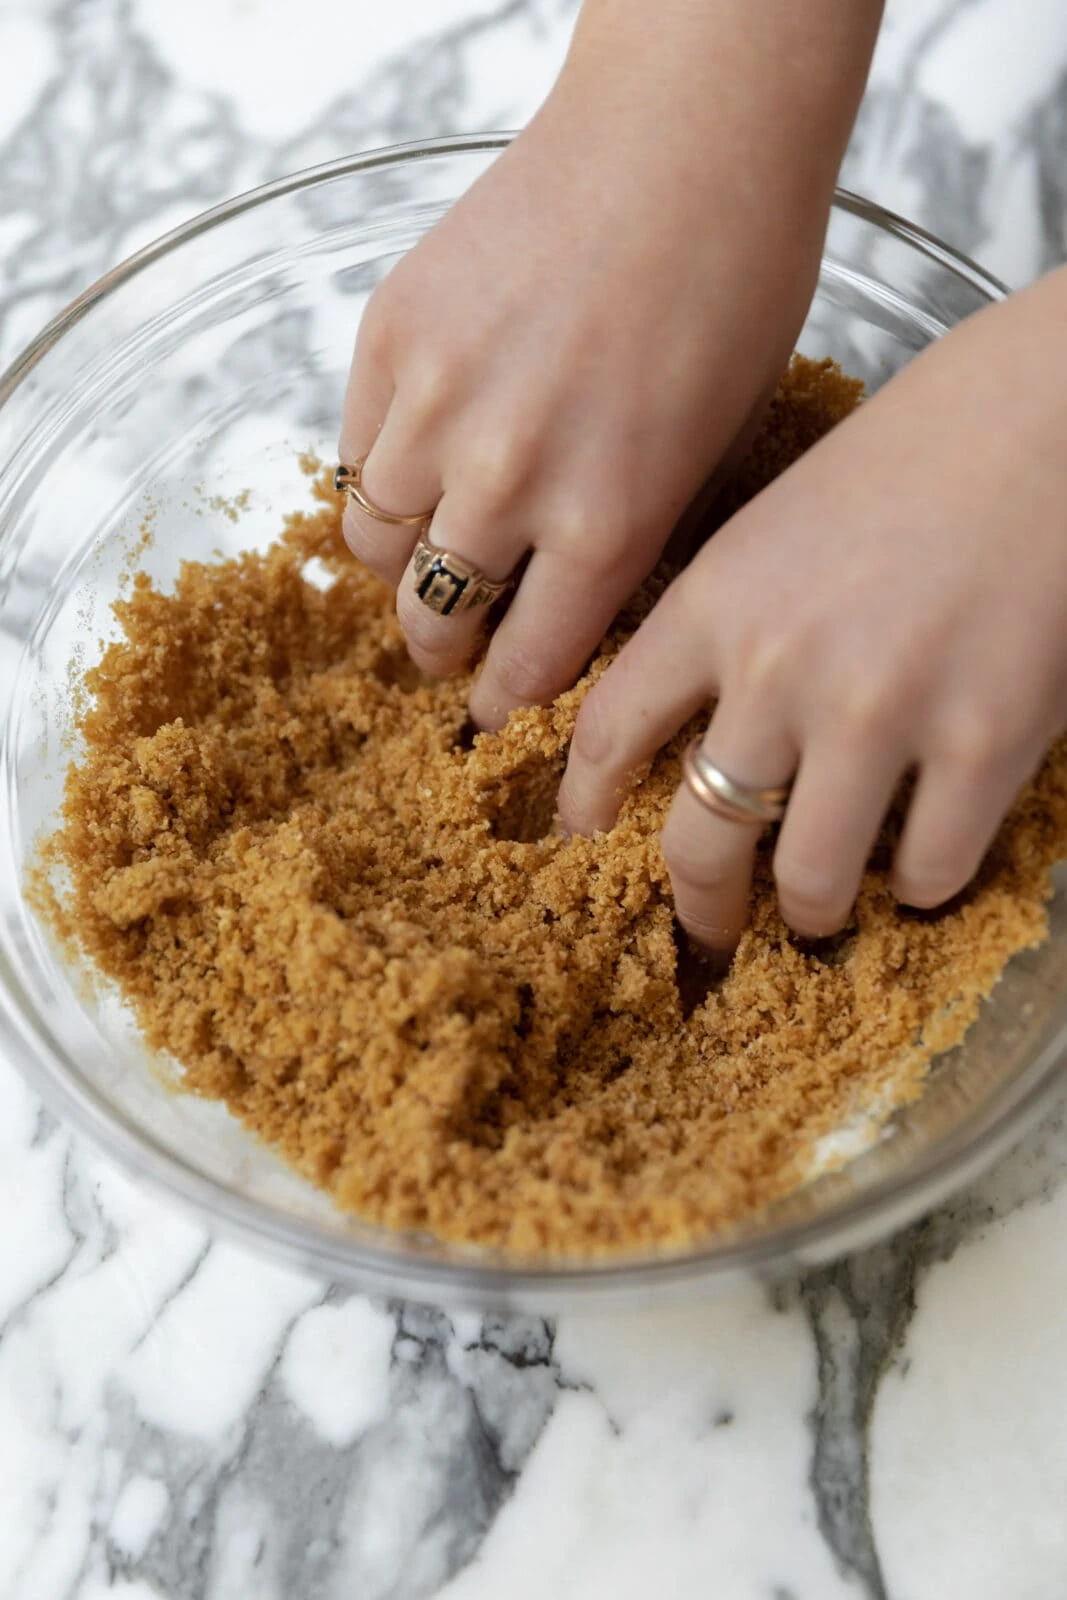 rub together the cheesecake batter until it looks like wet sand